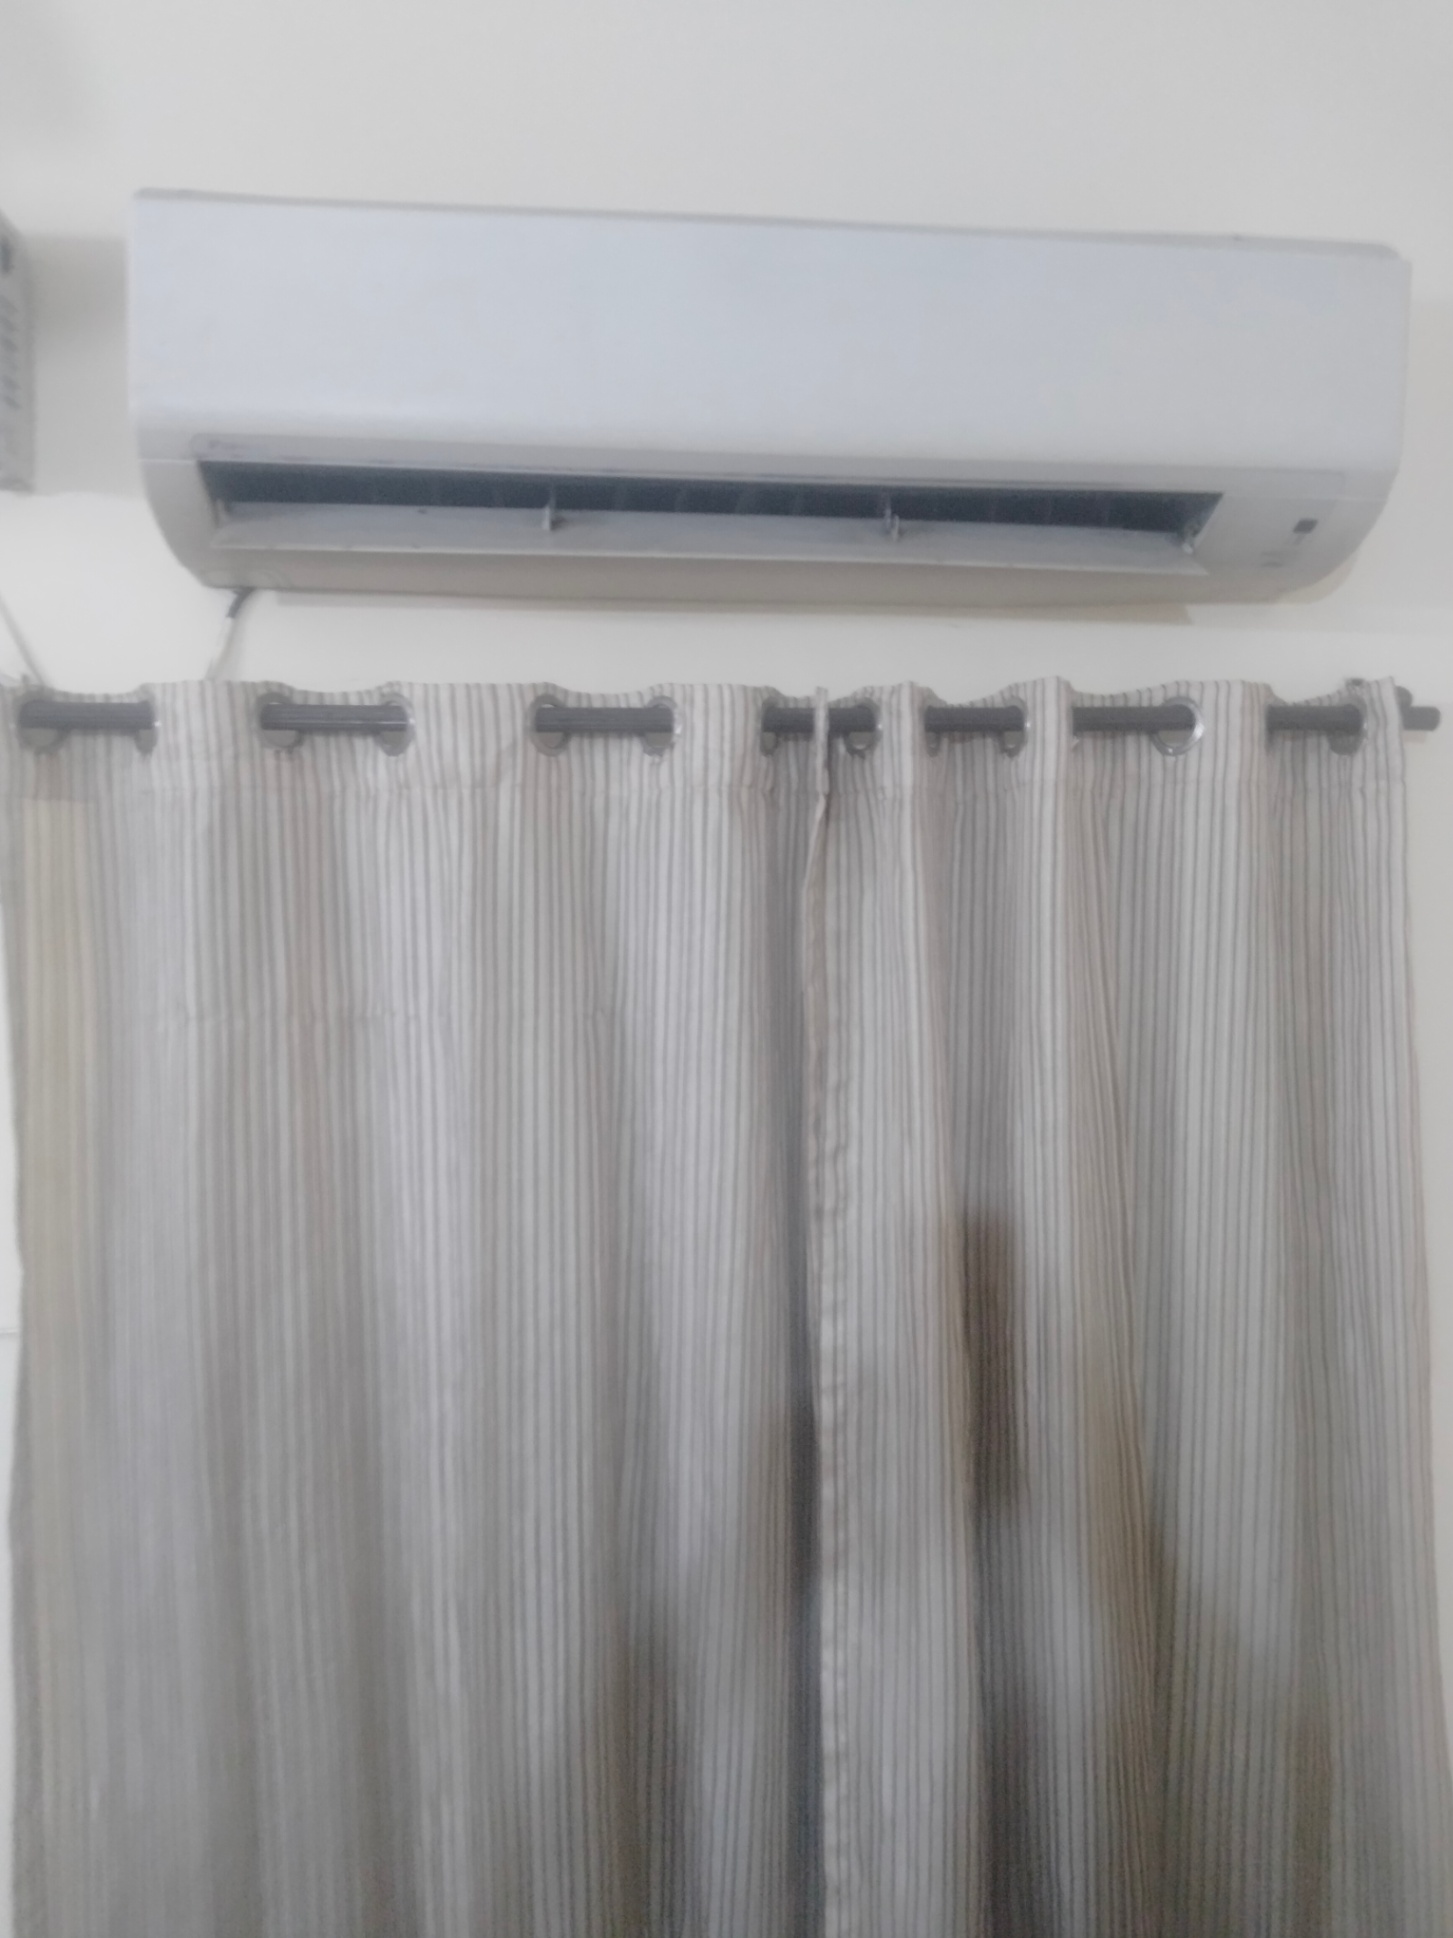 Available Split Ac & Window Ac  & On RENT AT MUMBAI AREAS ONLY. 